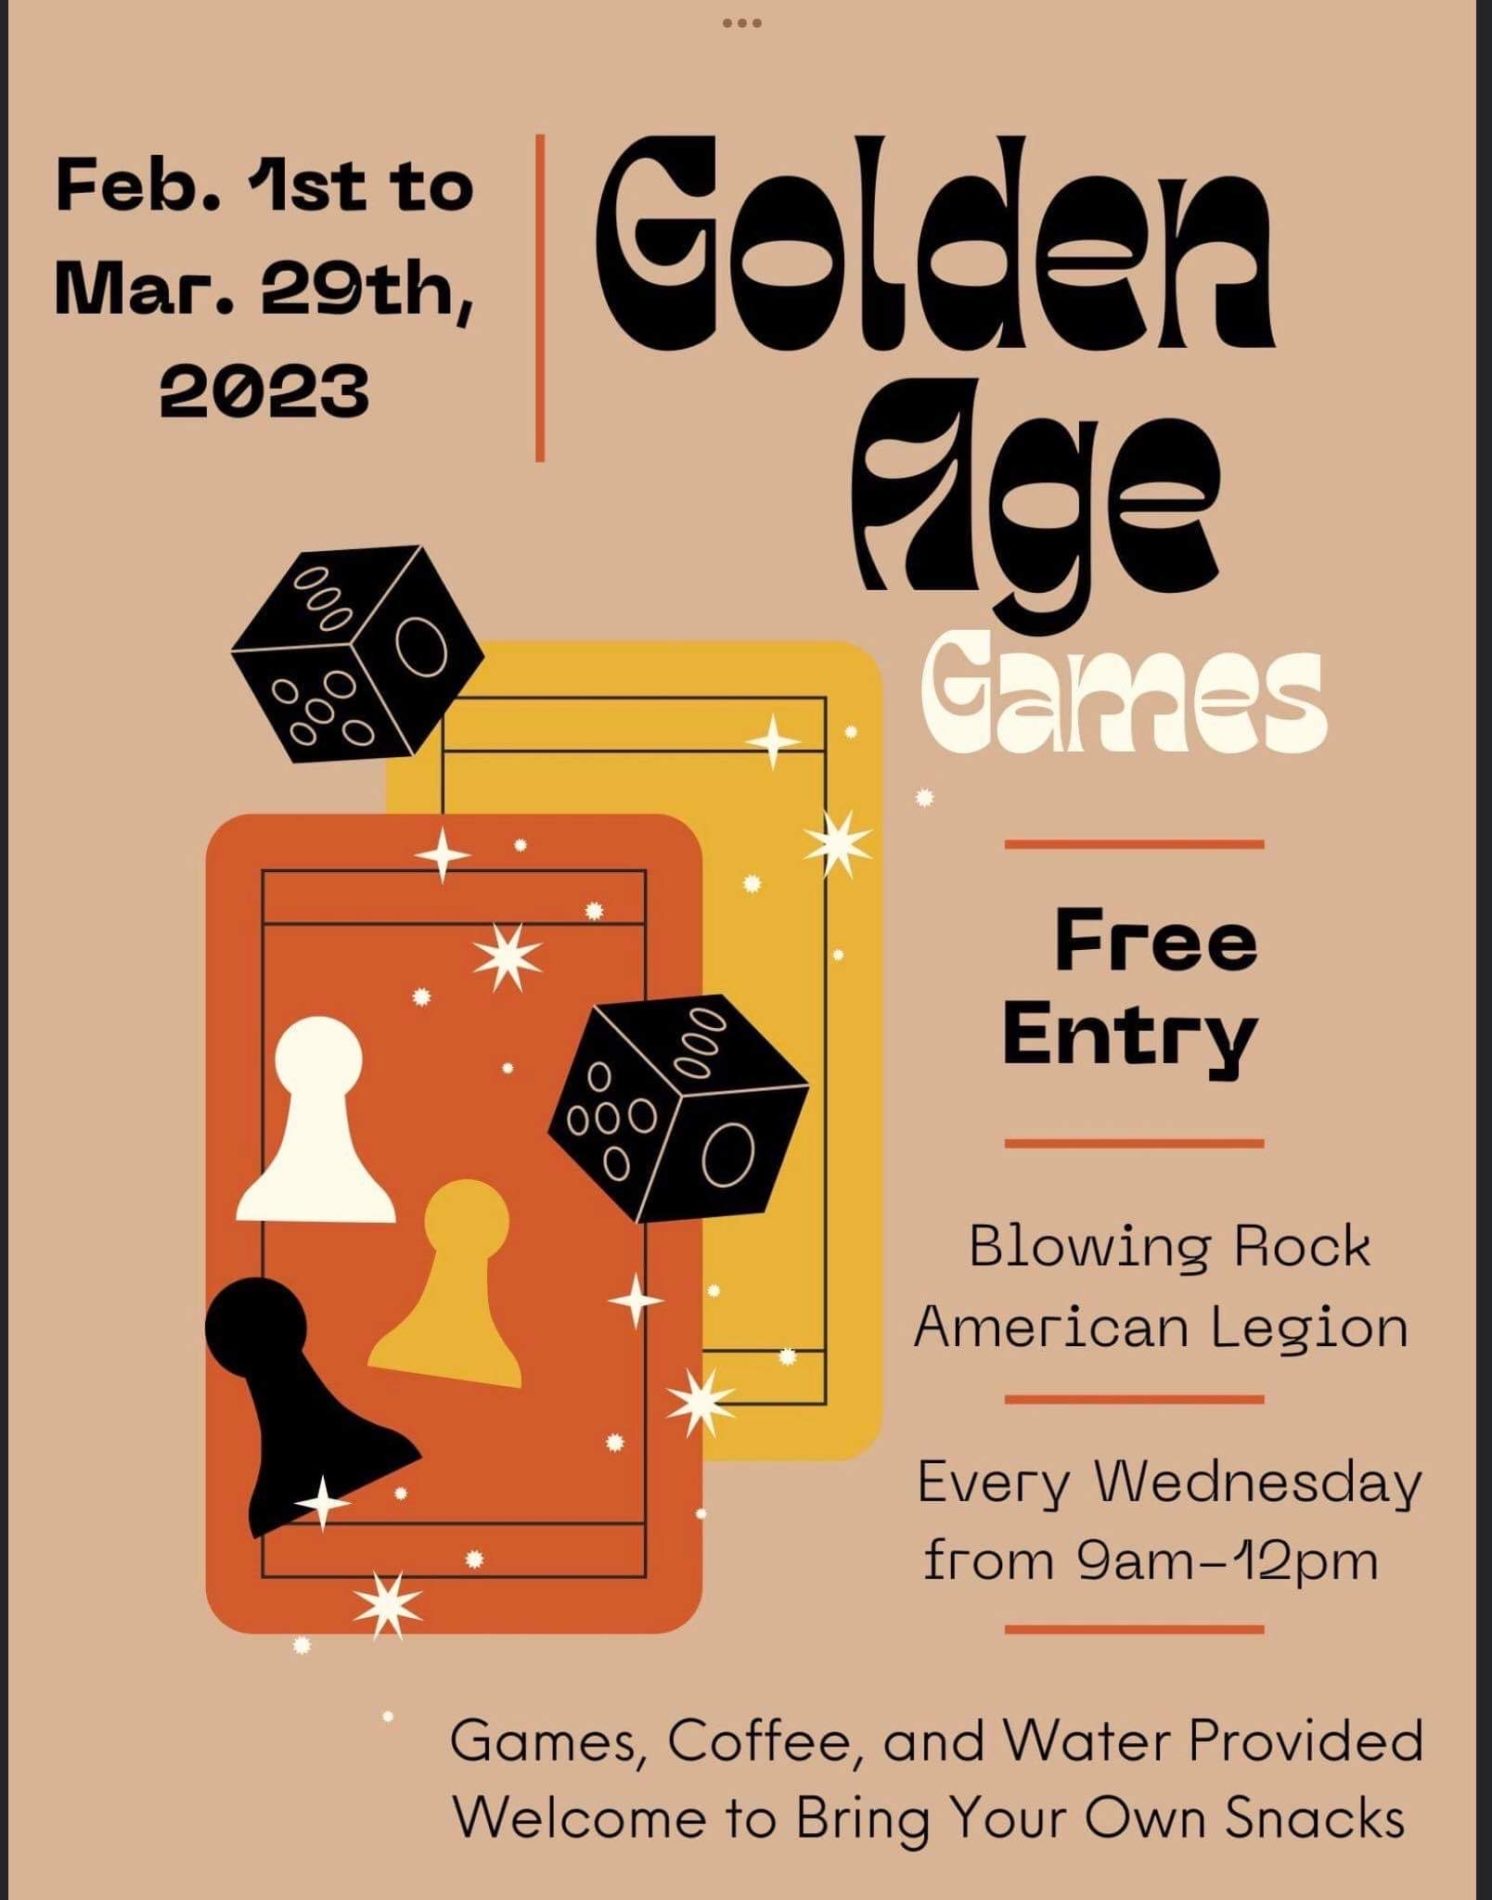 Golden Age Games at The American Legion